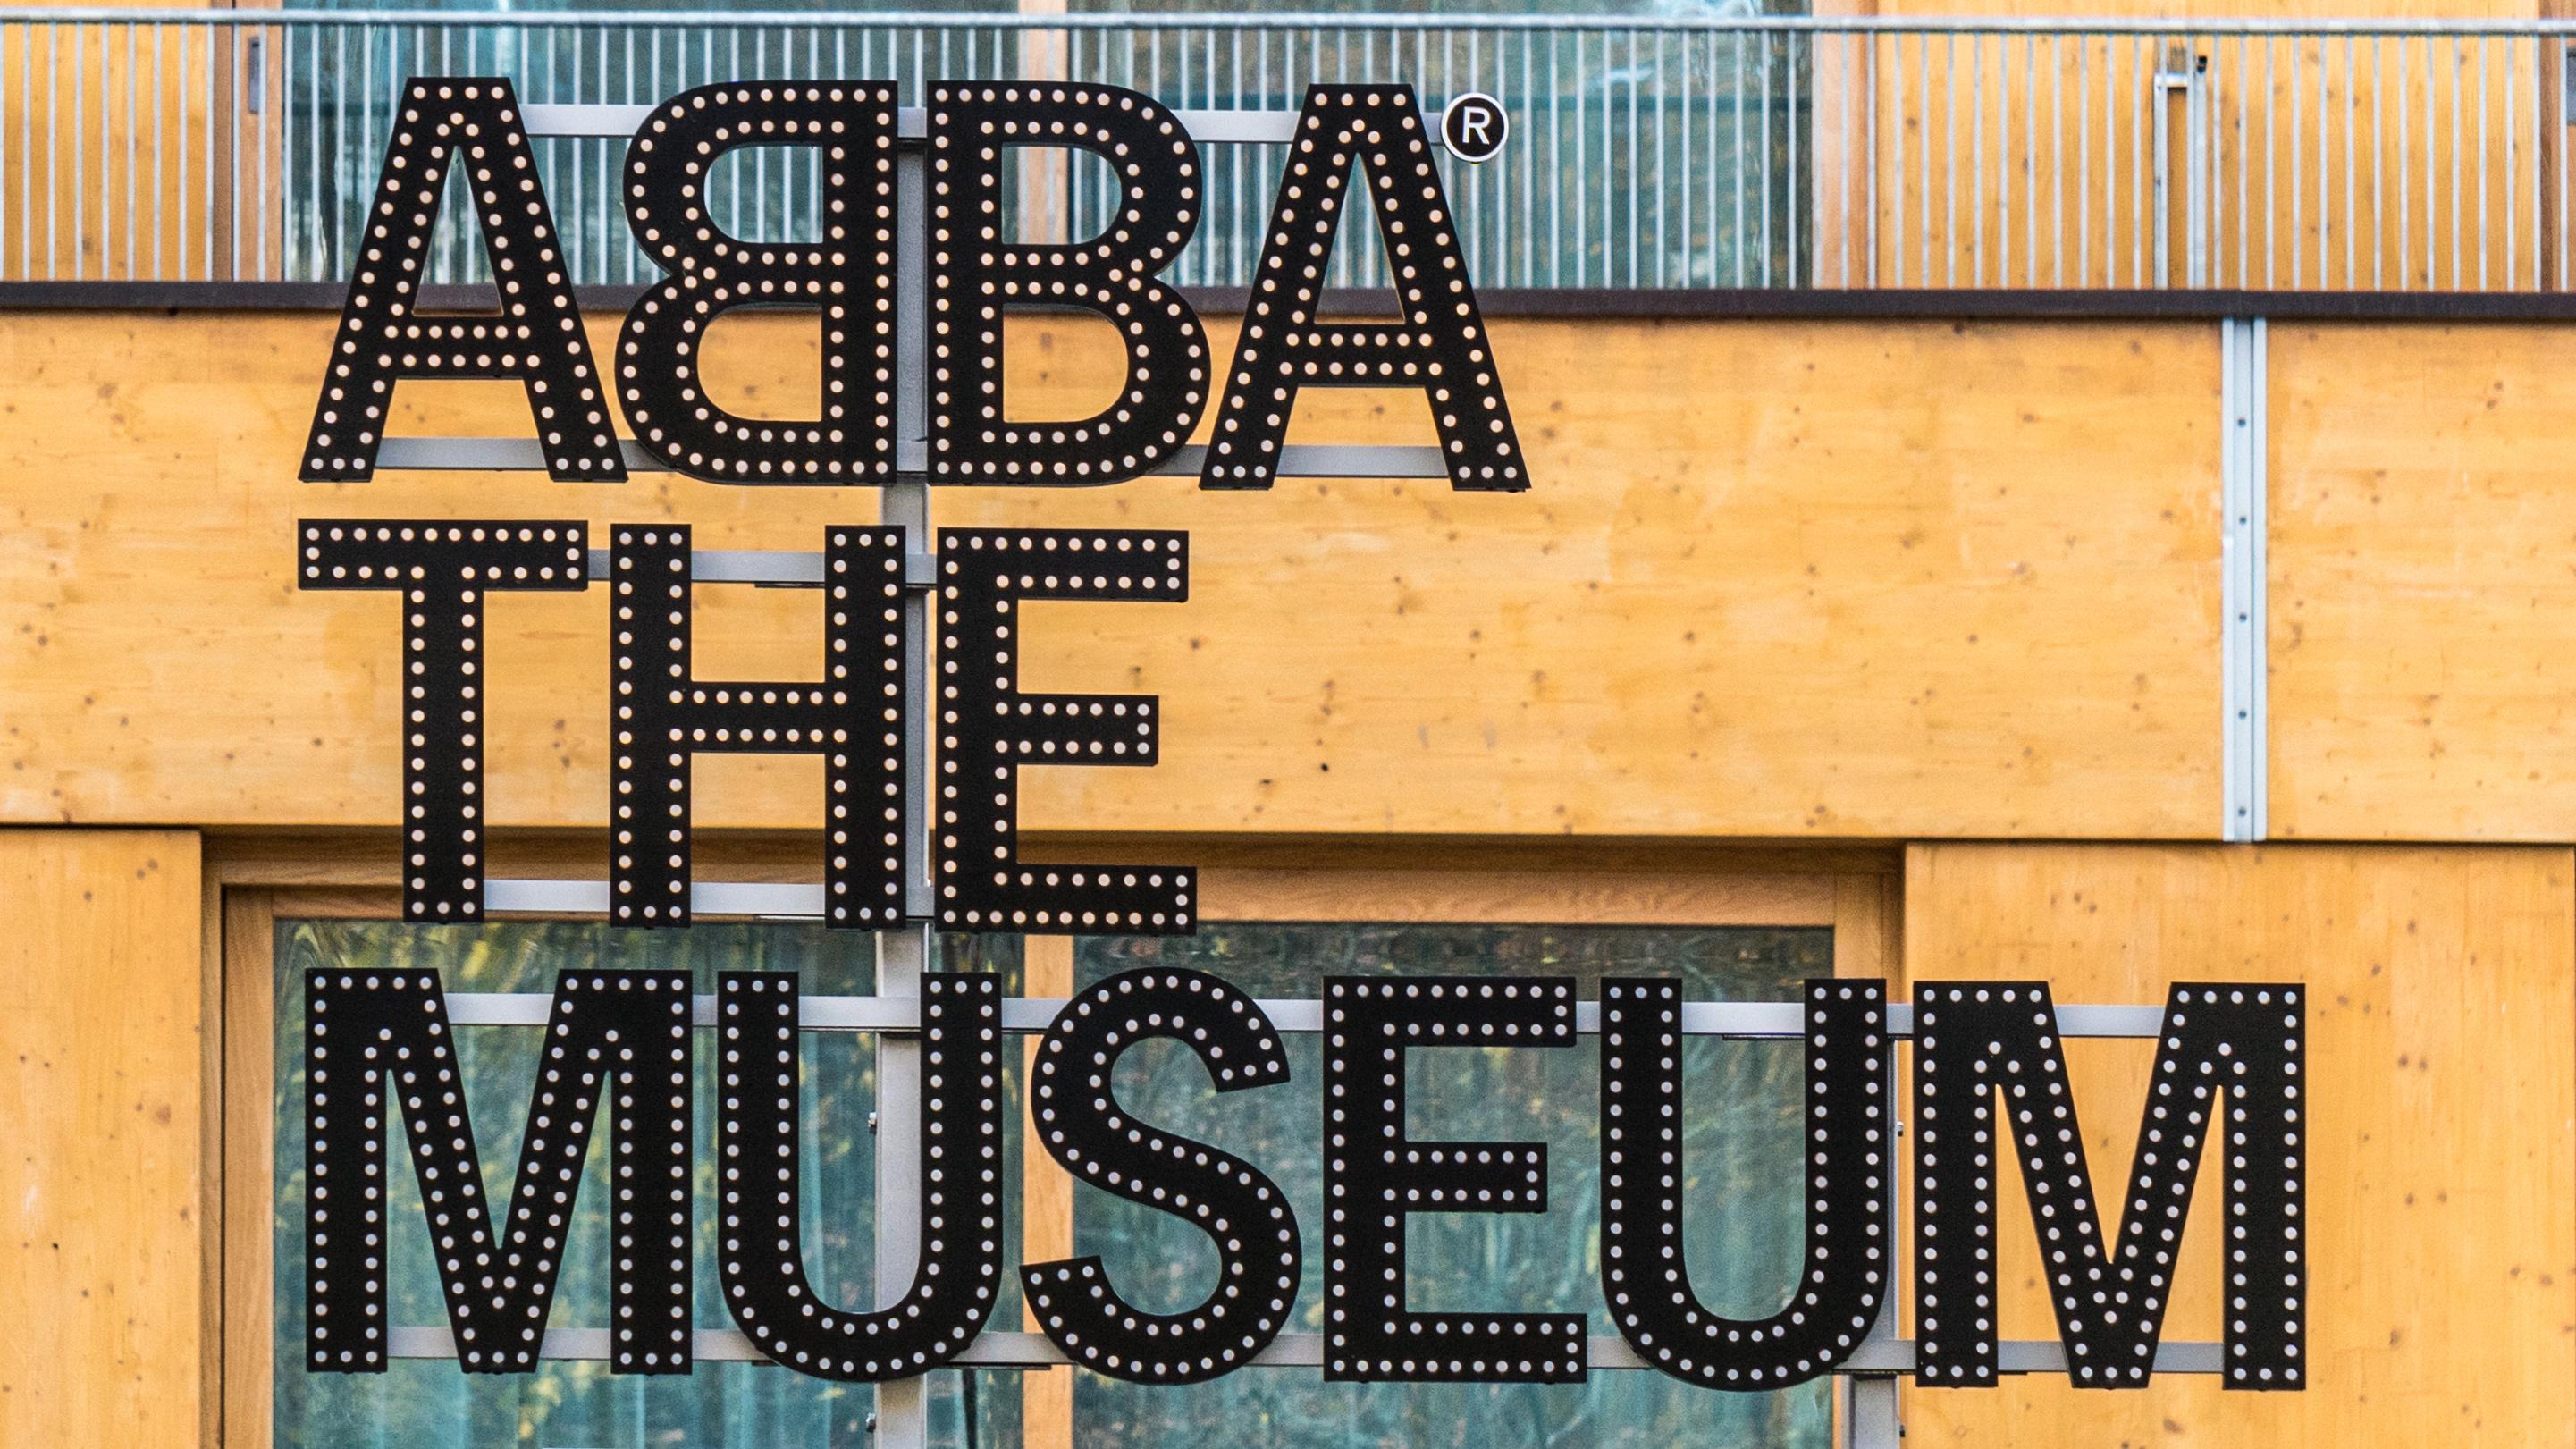 ABBA The Museum image